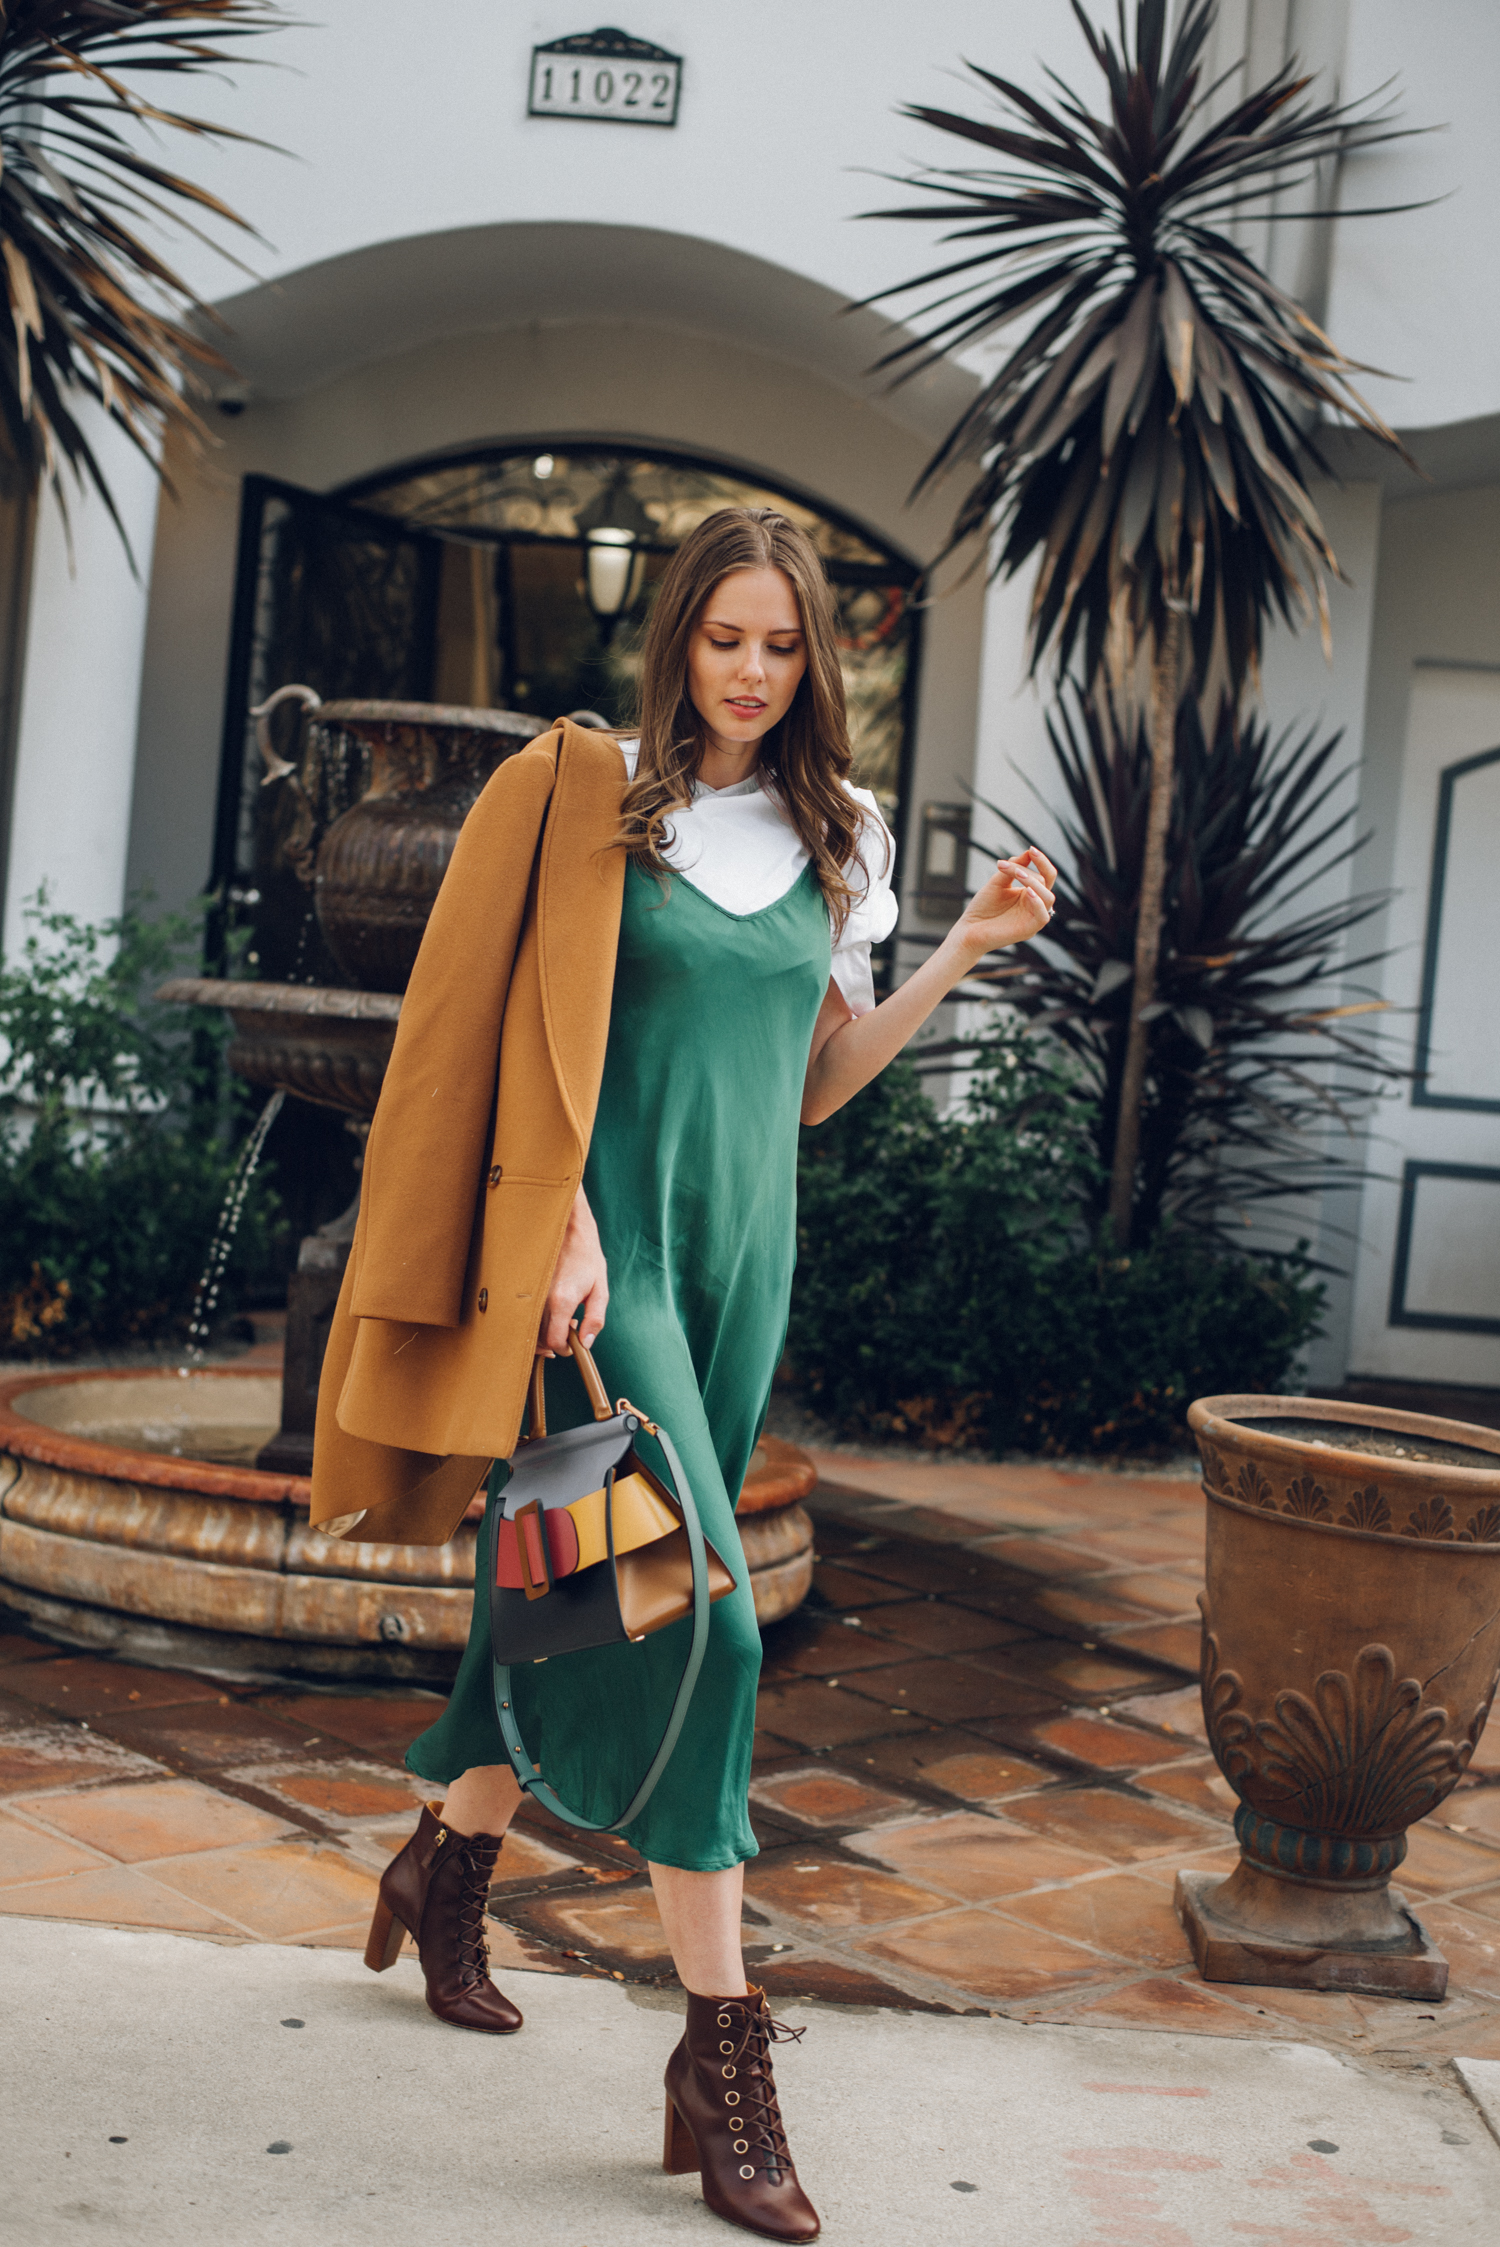 Alyssa Campanella of The A List blog shares why I limit what I post on social media wearing Boyy boutique Karl bag, Sezane James coat, and Sezane Pauline boots